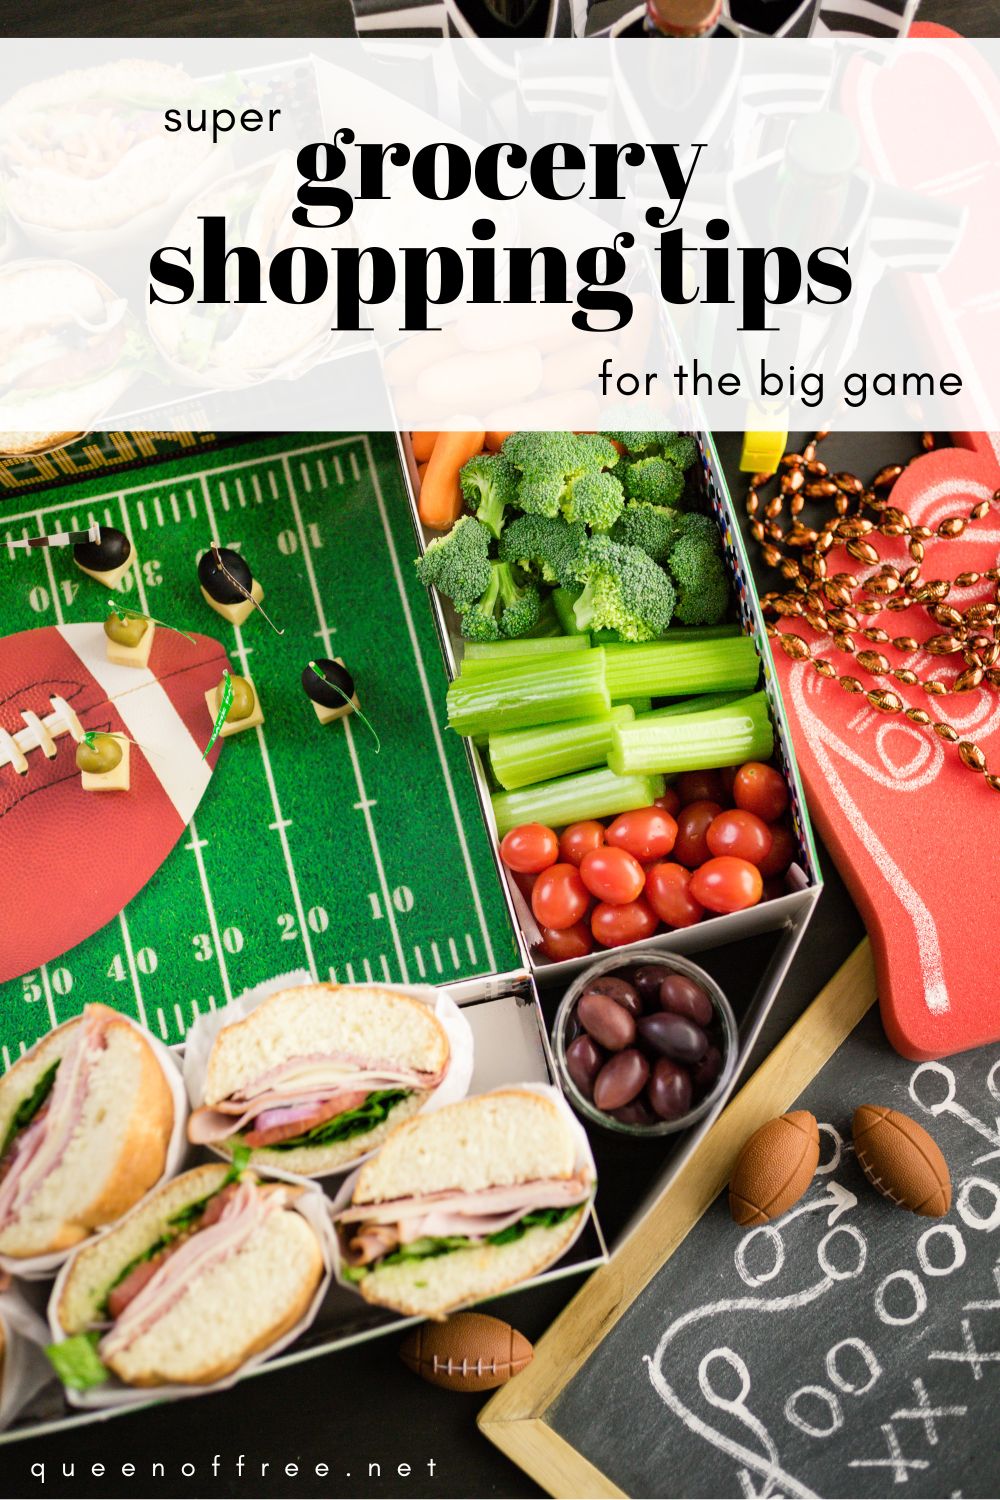 Gearing up for the big game? Don't miss these SUPER Grocery Store Shopping tips!